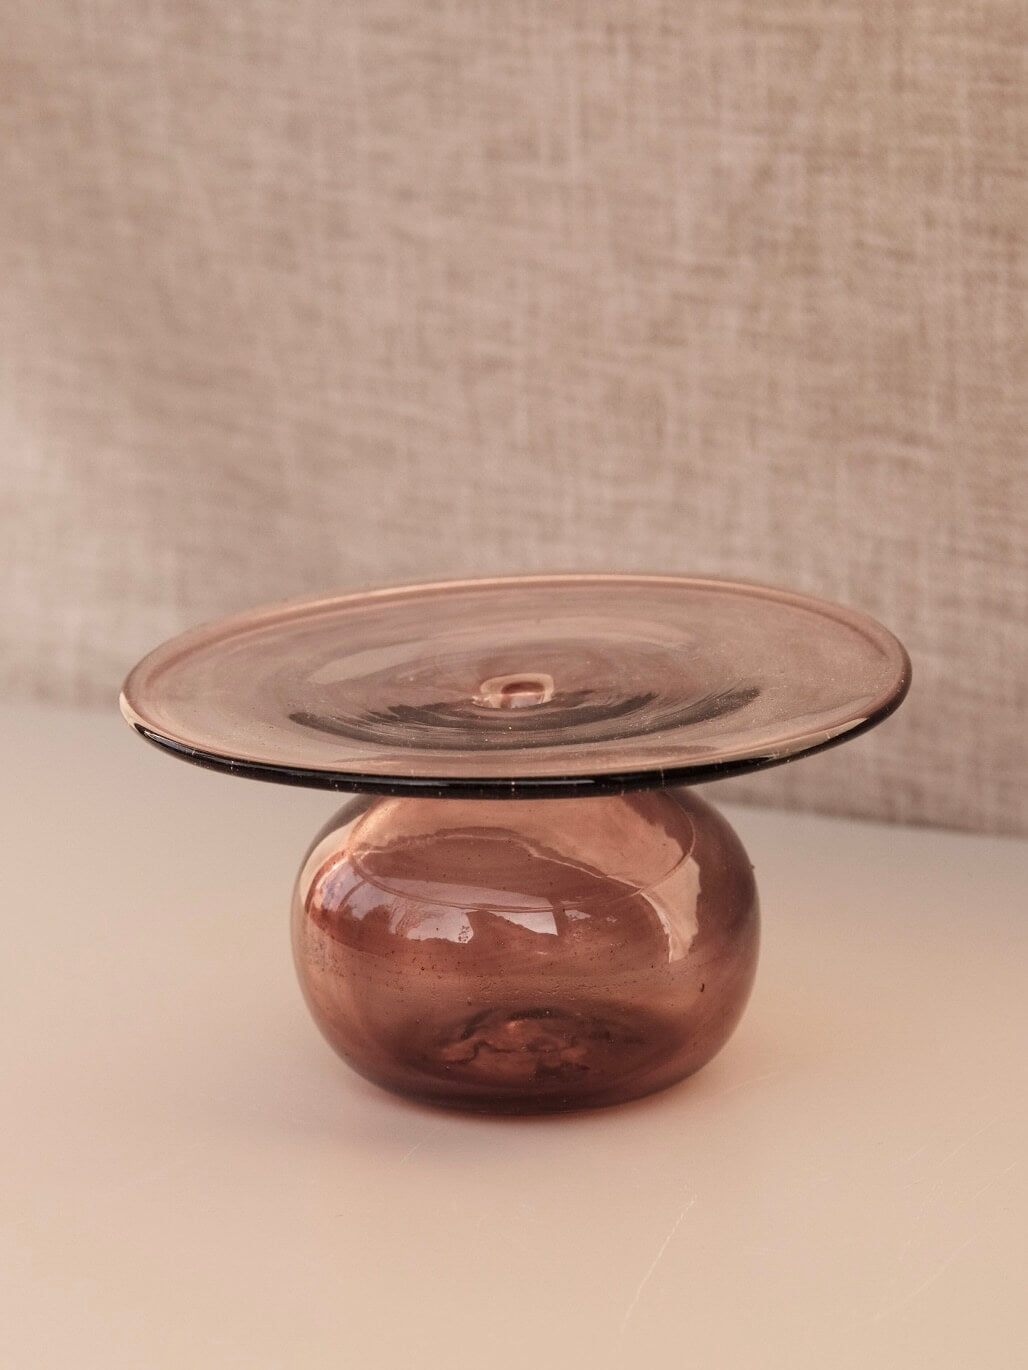 Candle holder or vase made from a raspberry coloured glass. The top is a round disk perfect for a large single flower to sit on. Handblown in Paris.